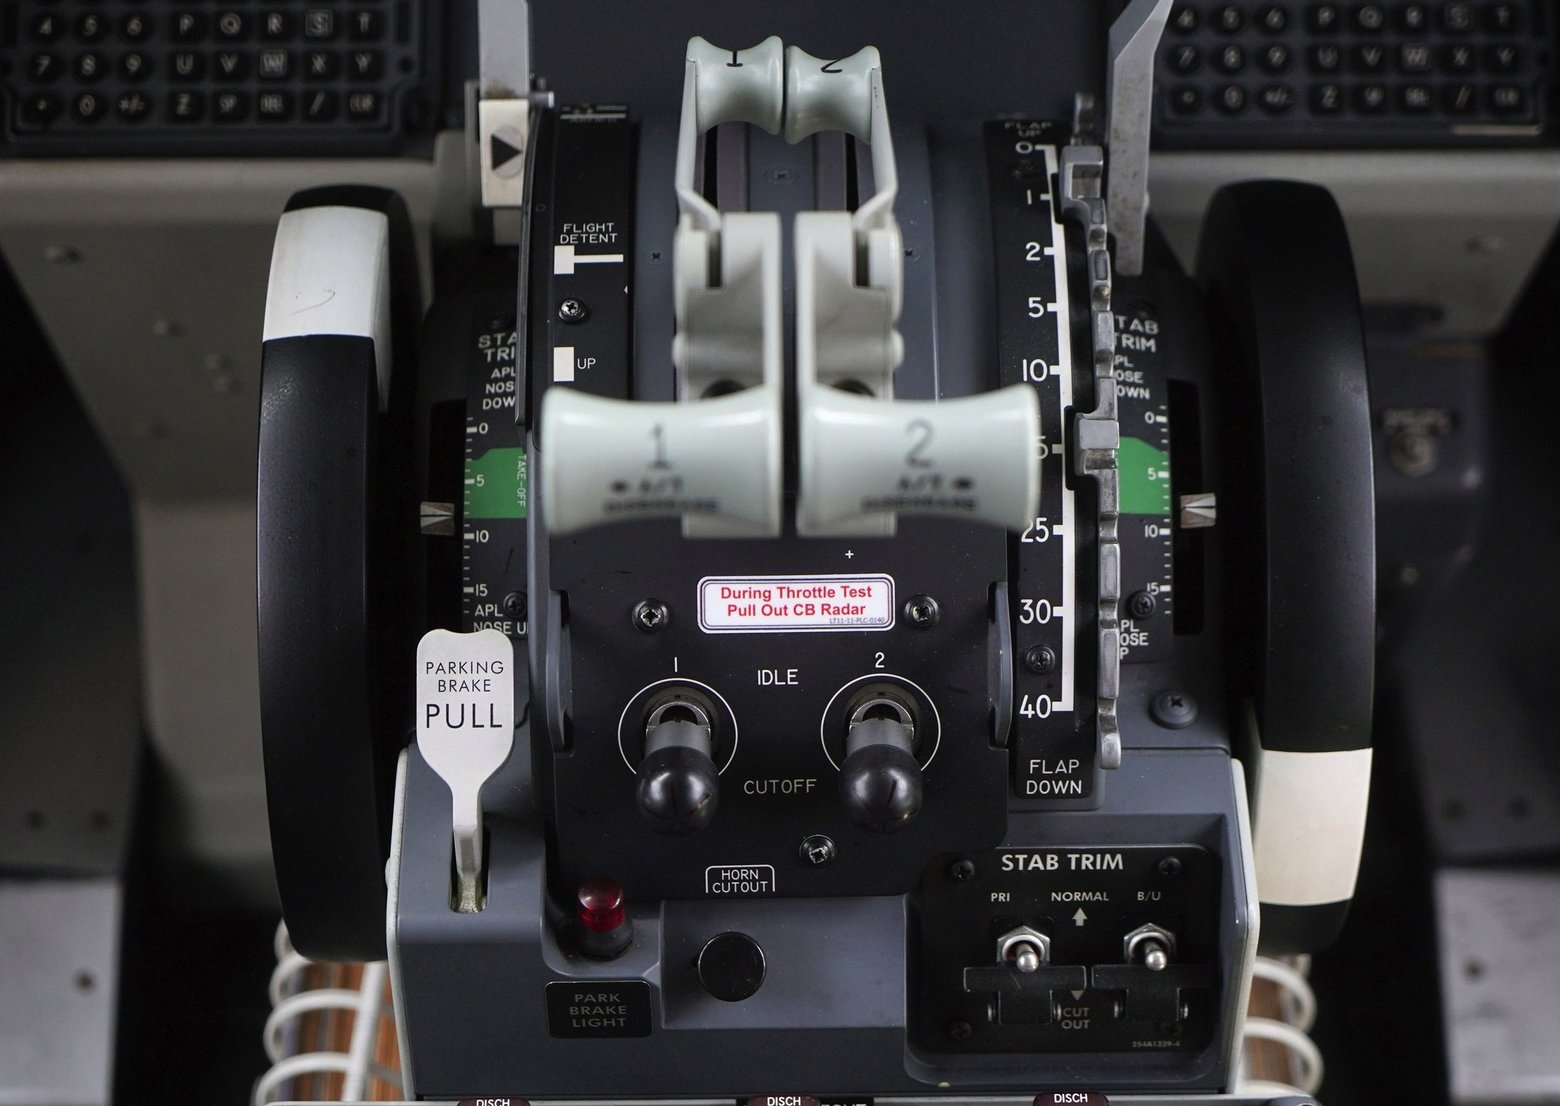 The aisle-stand controls in the cockpit of a Boeing 737 Max. If the two switches shown at the bottom right under the STAB TRIM label are flipped to the cutout position, all automated movement of the horizontal stabilizer is disabled, including MCAS. Source: Dimas Ardian/Bloomberg via Seattle Times